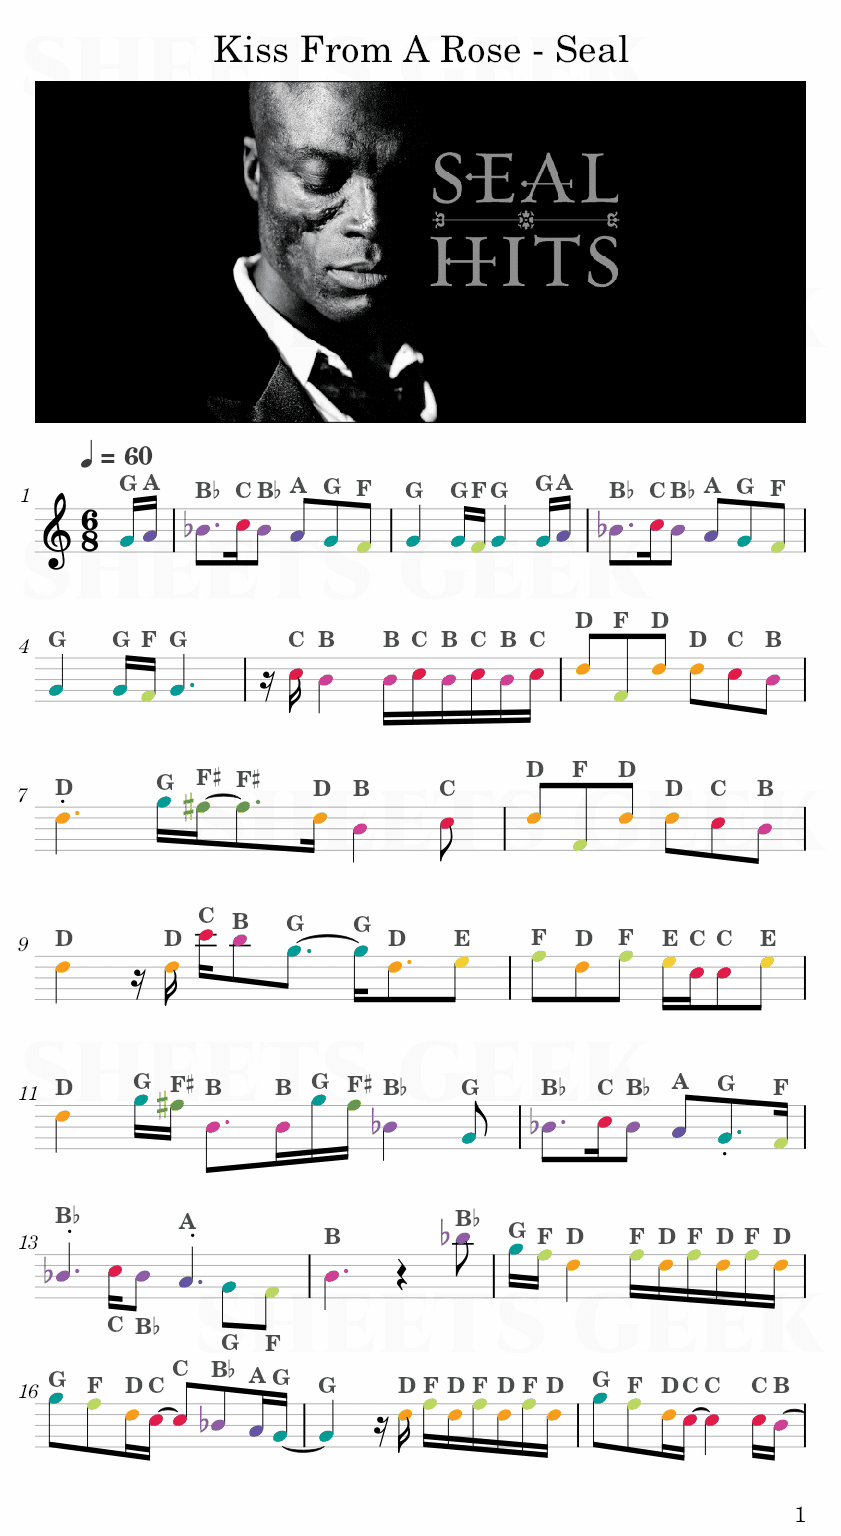 Kiss From A Rose - Seal Easy Sheet Music Free for piano, keyboard, flute, violin, sax, cello page 1